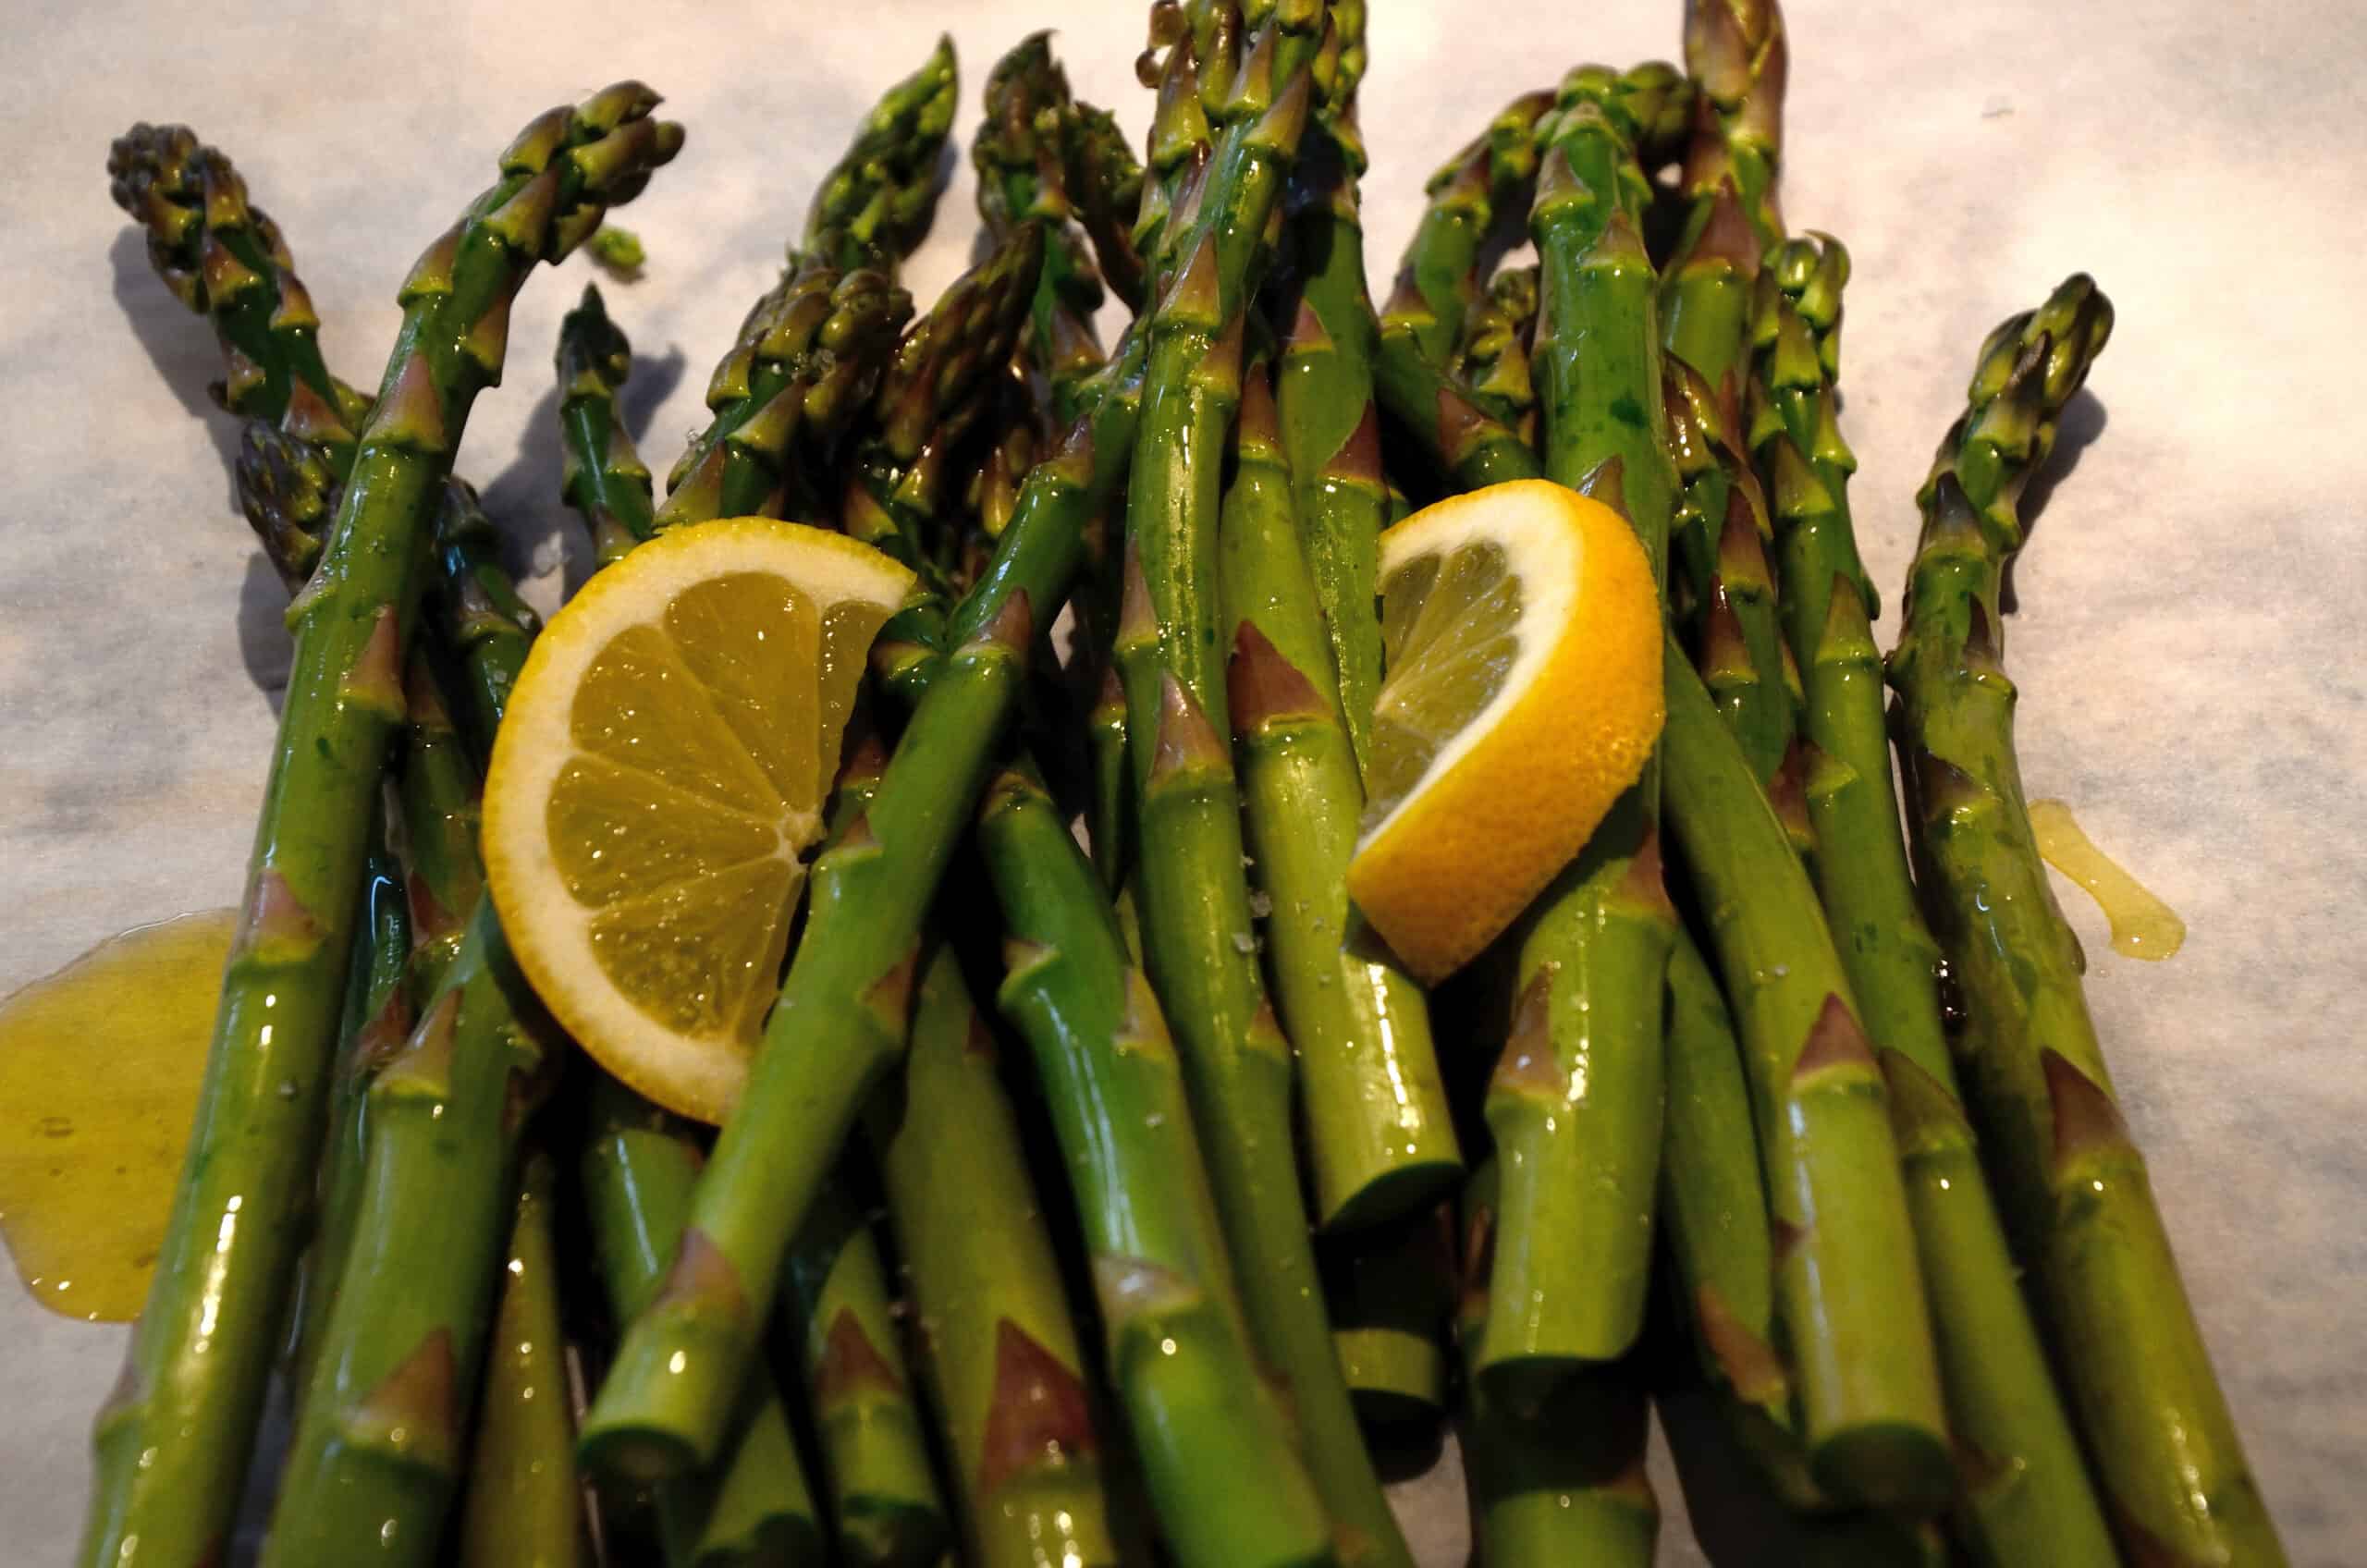 Oven Roasted Asparagus with lemon slices.